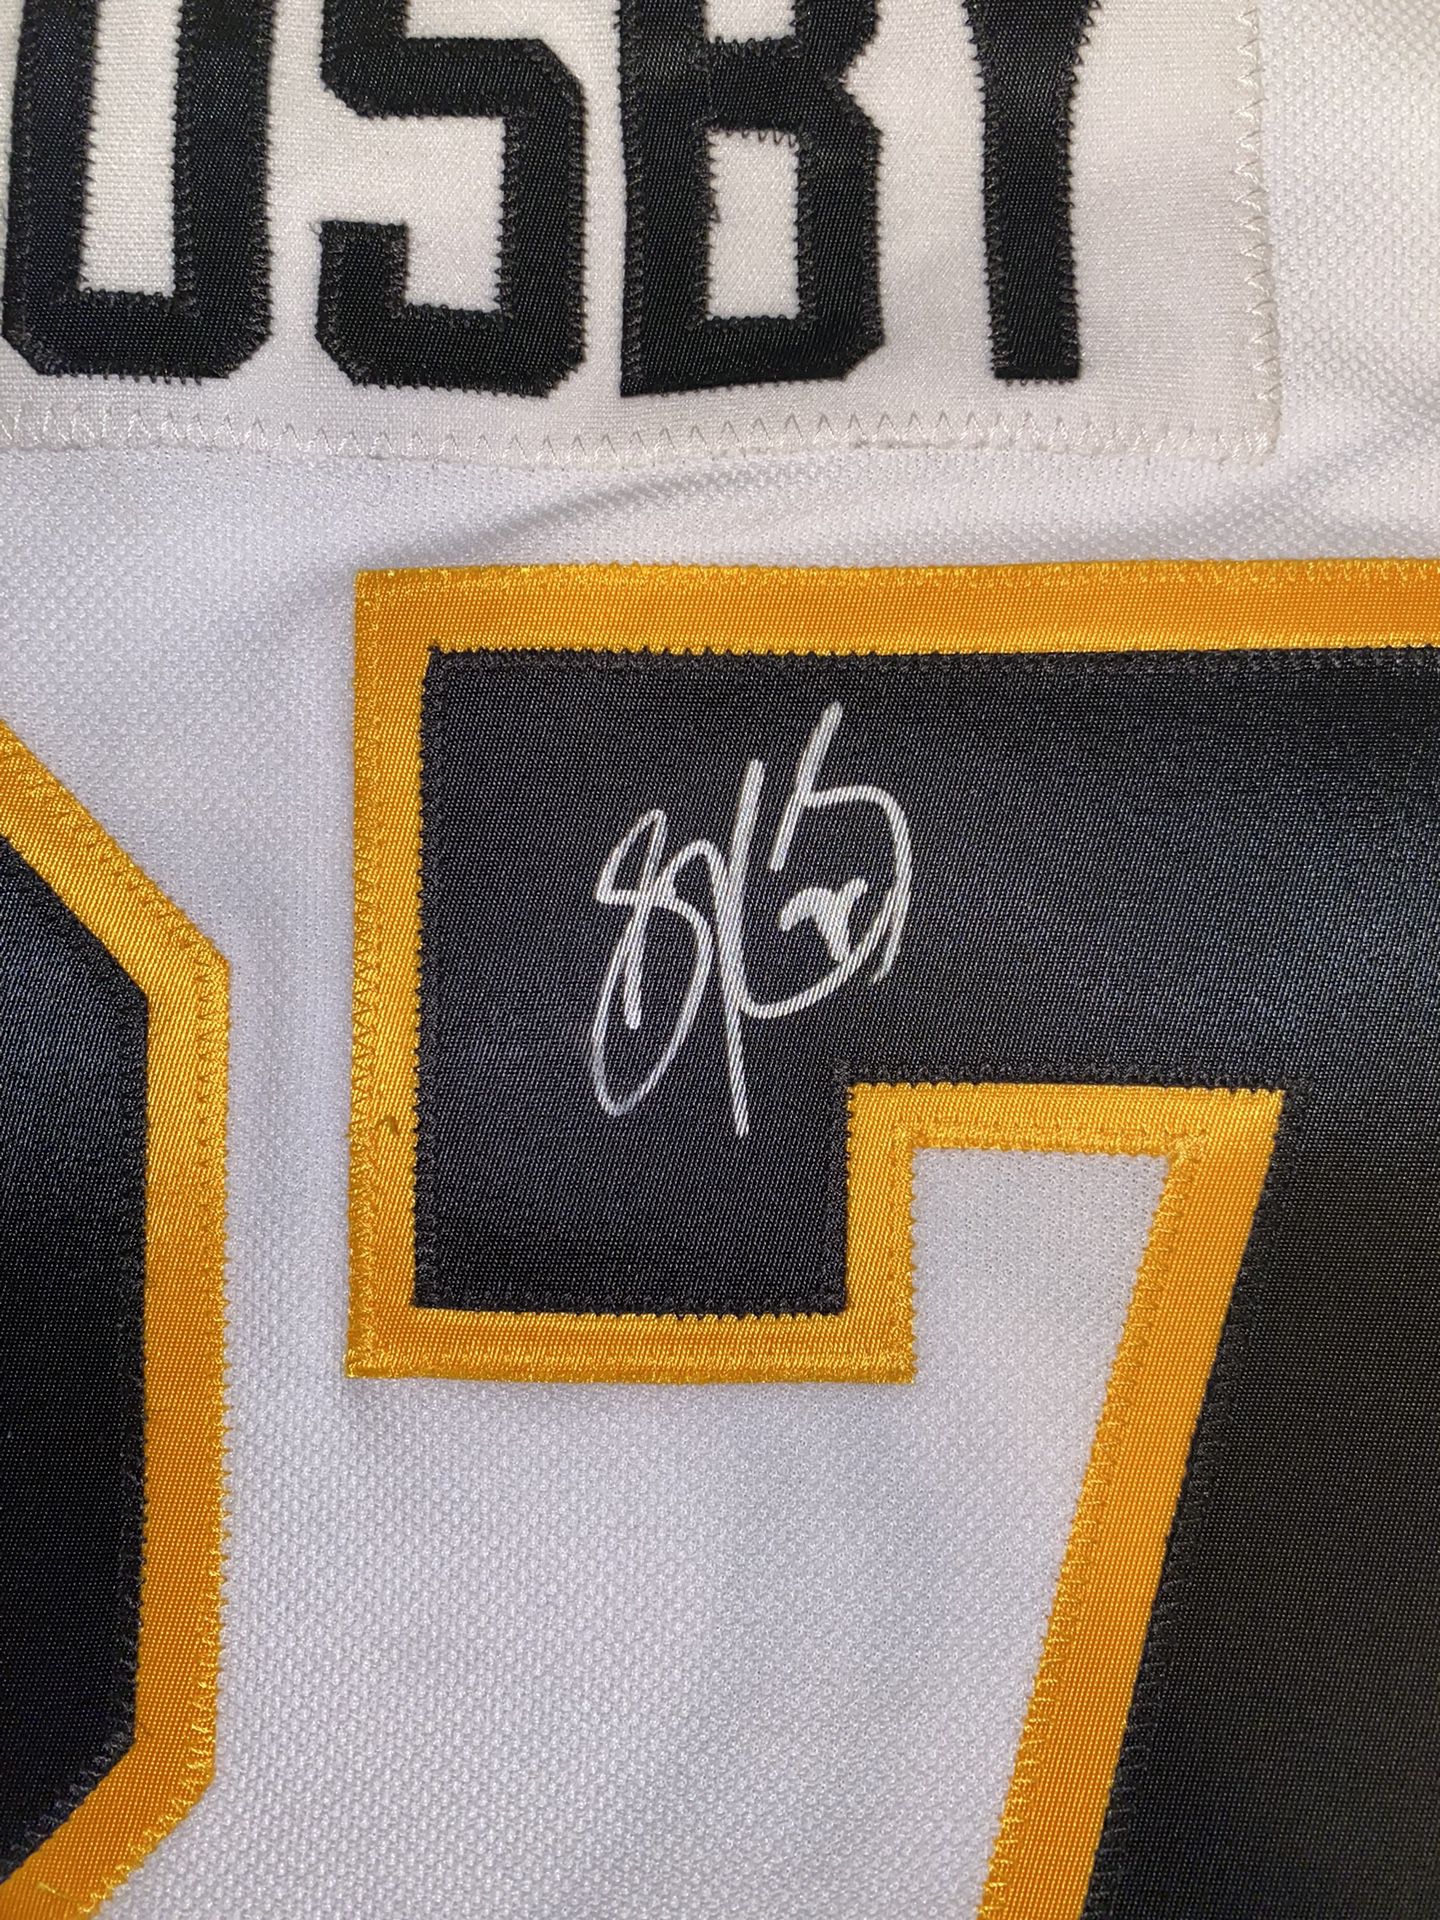 SIGNED Sidney Crosby Adidas Jersey (Authenticated) for Sale in Morgantown,  WV - OfferUp